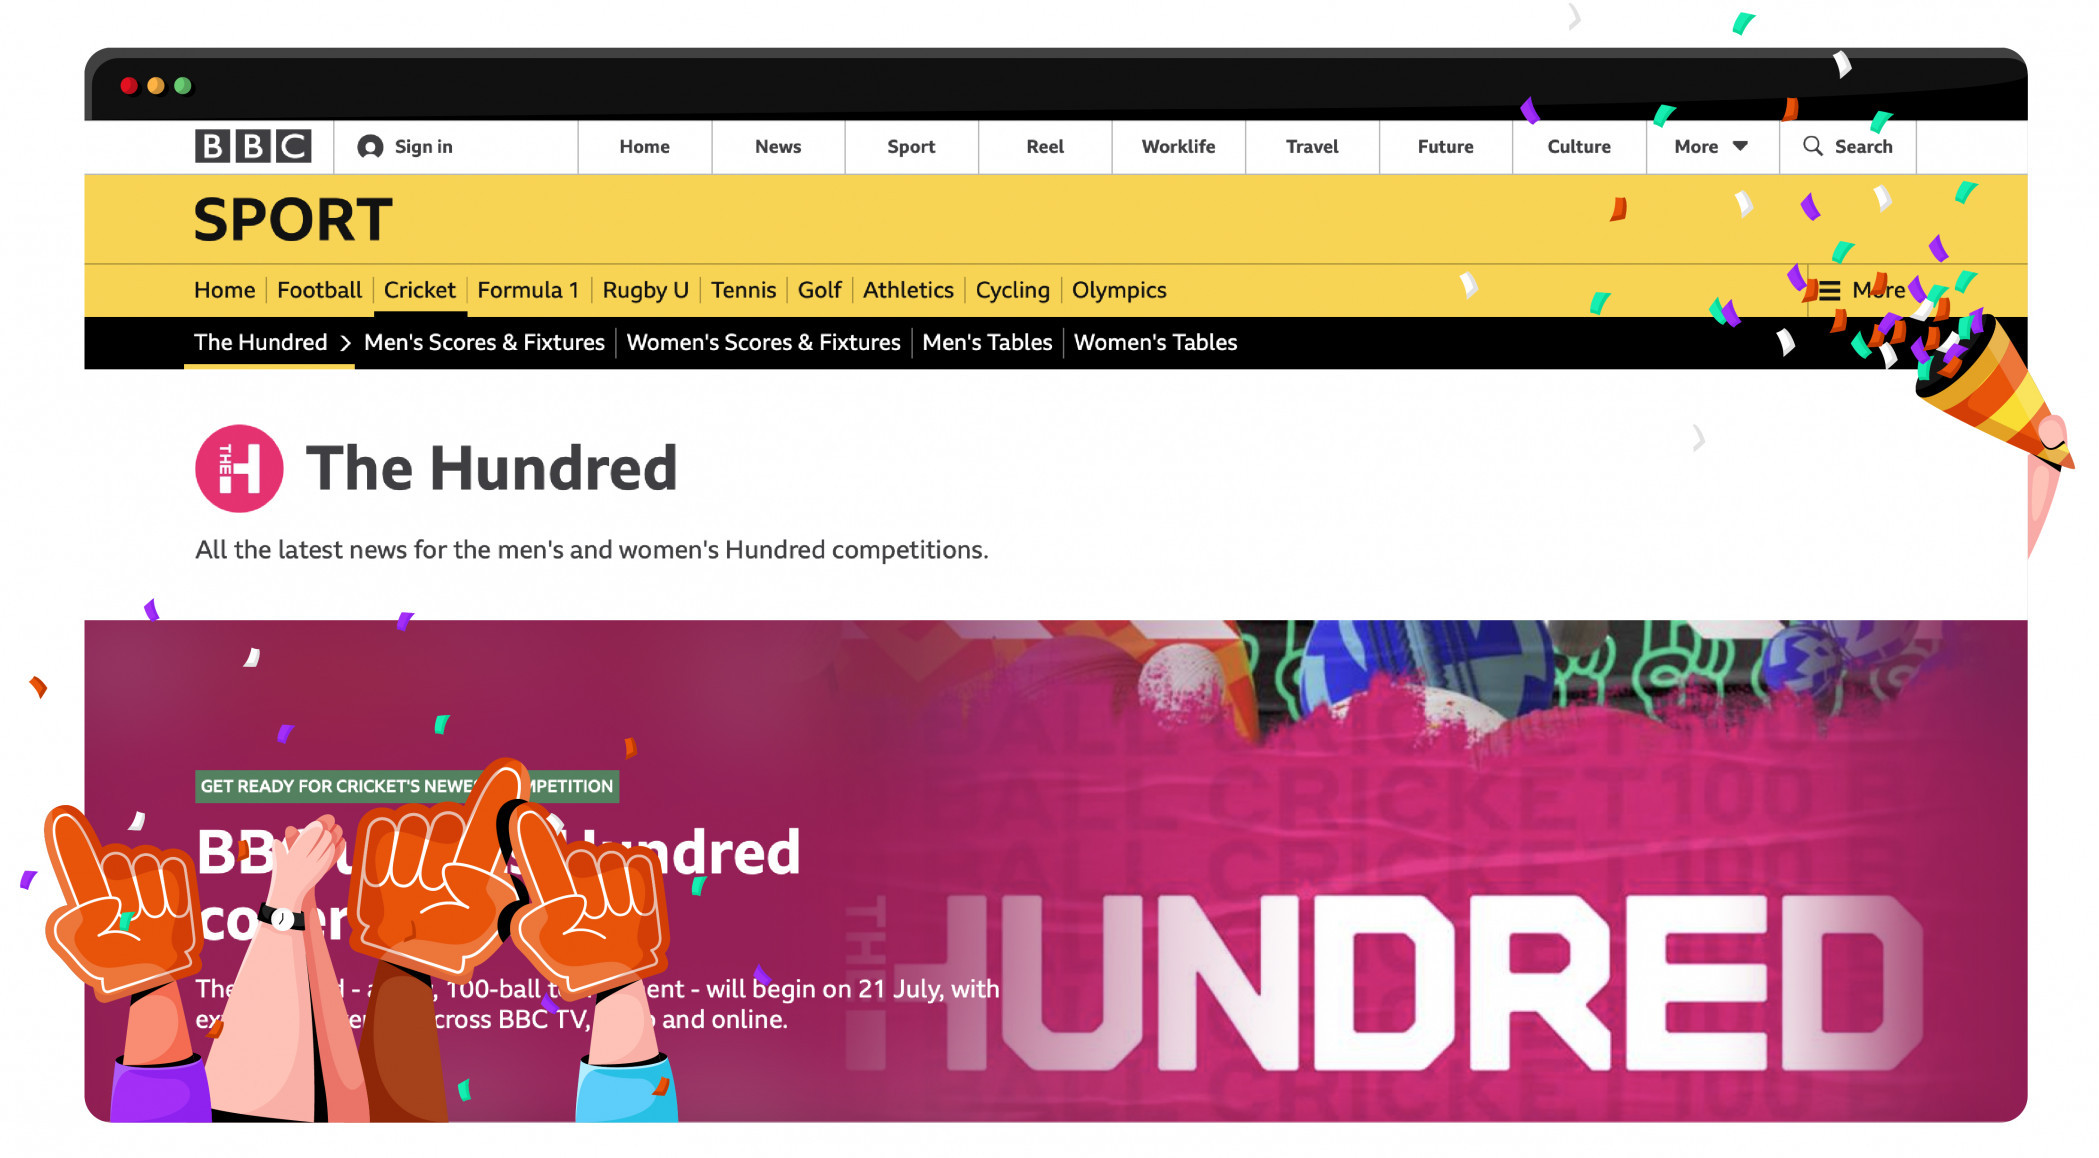 The Hundred streaming on BBC iPlayer for free